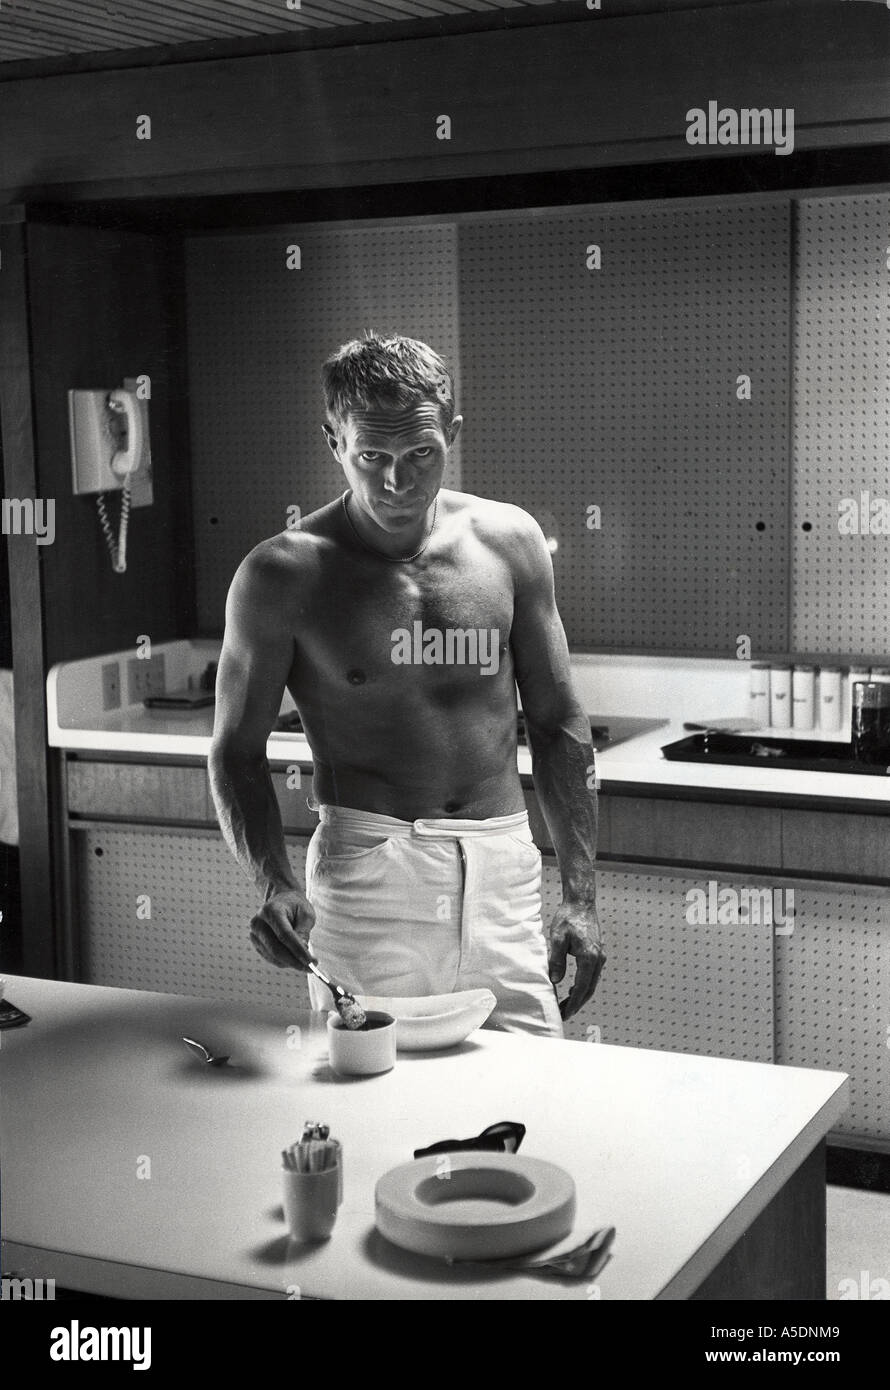 STEVE MCQUEEN US actor making coffee in his kitchen Stock Photo